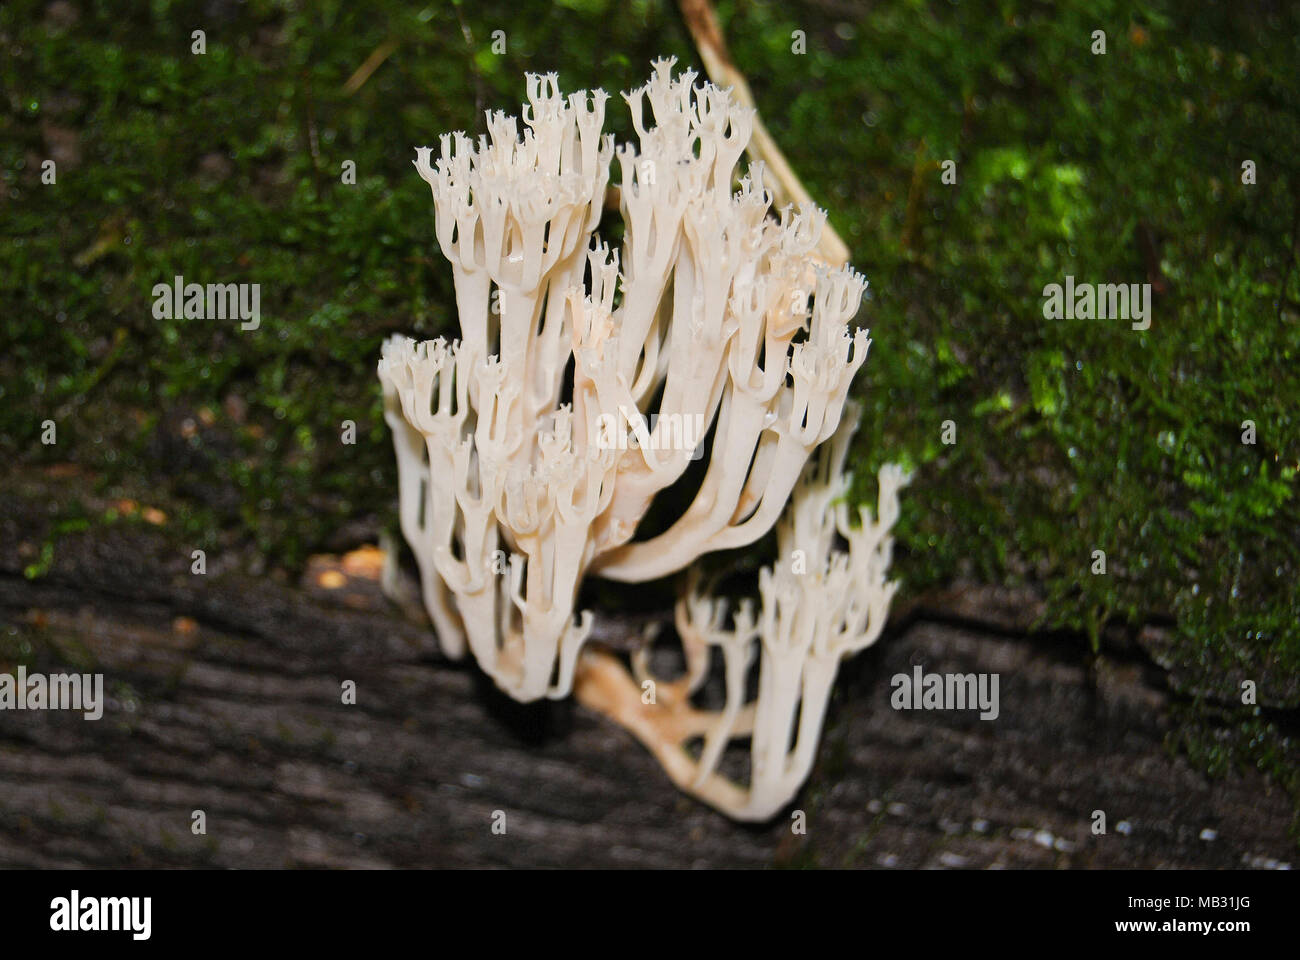 A white coral mushroom (Clavulina coralloides) grows on an old tree in the forest. Stock Photo